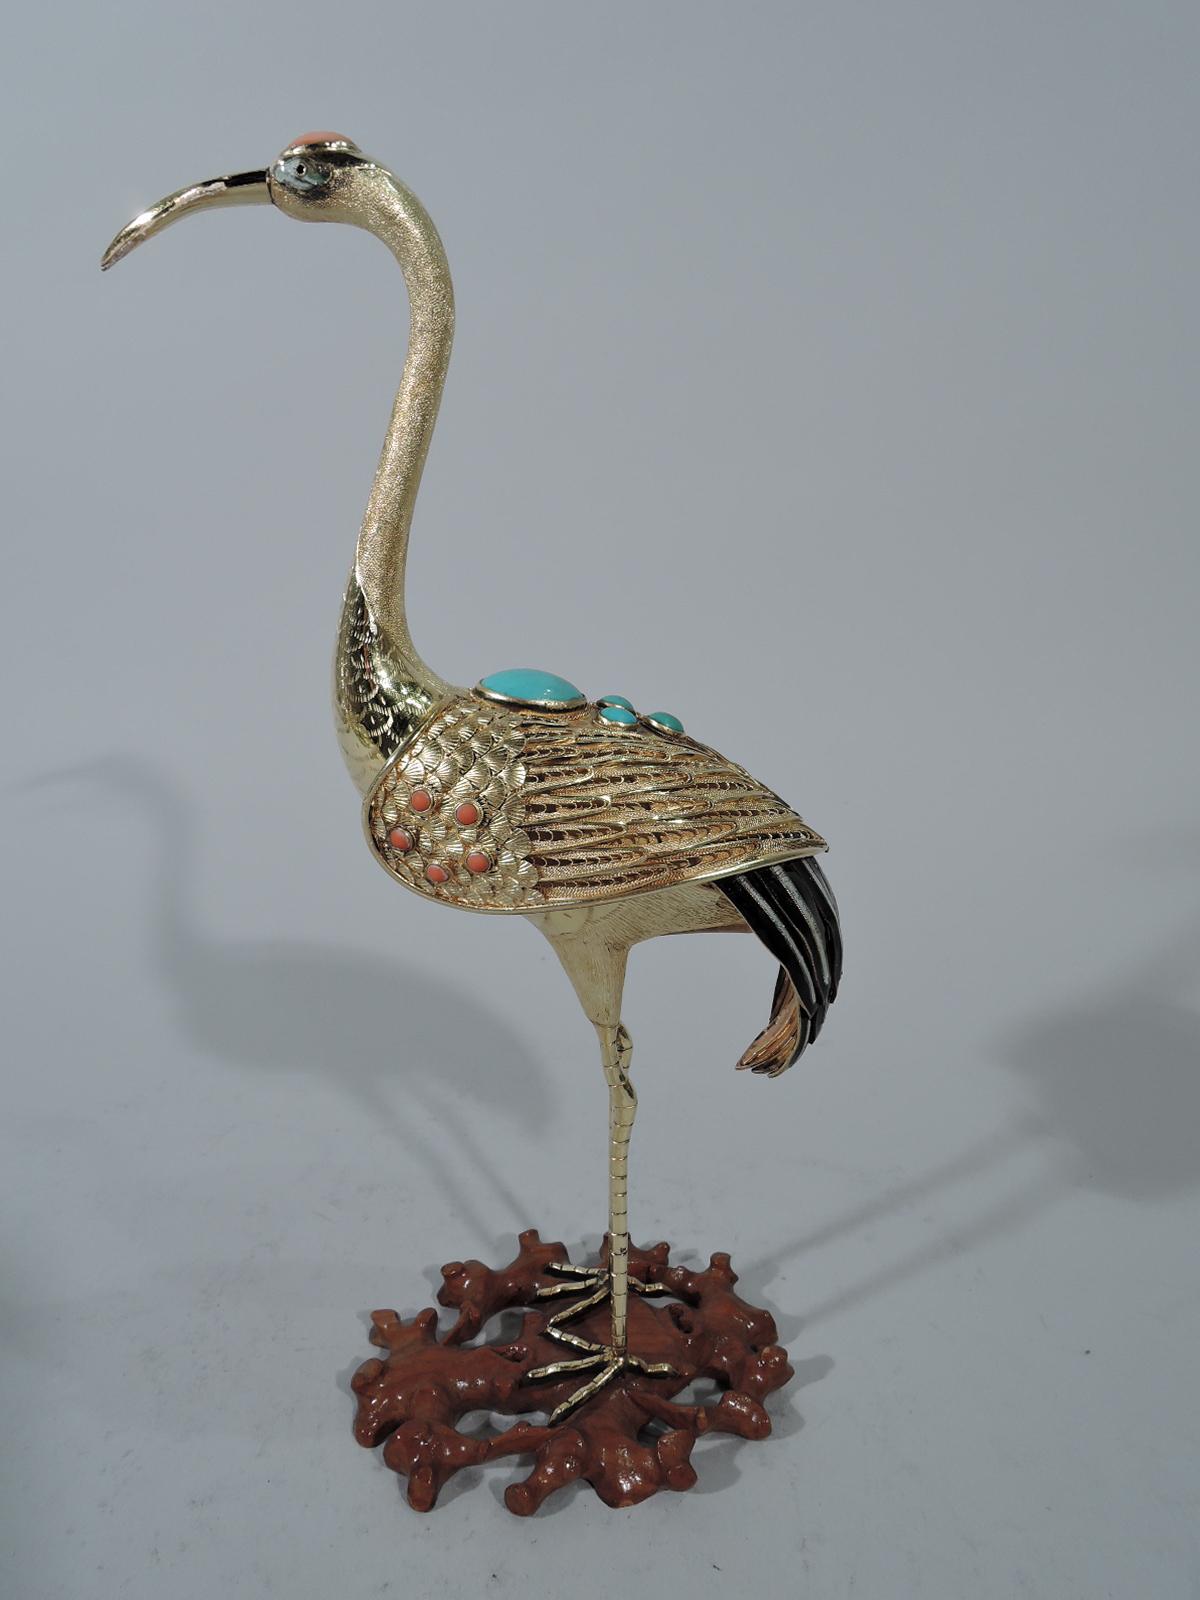 Antique Chinese silver gilt bird figure, early 20th century. A crane with S-scroll neck and long pointed bill and round body stands on spindly legs and talon feet mounted to carved rosewood base. Applied wings with imbricated fans and feathers. Tail